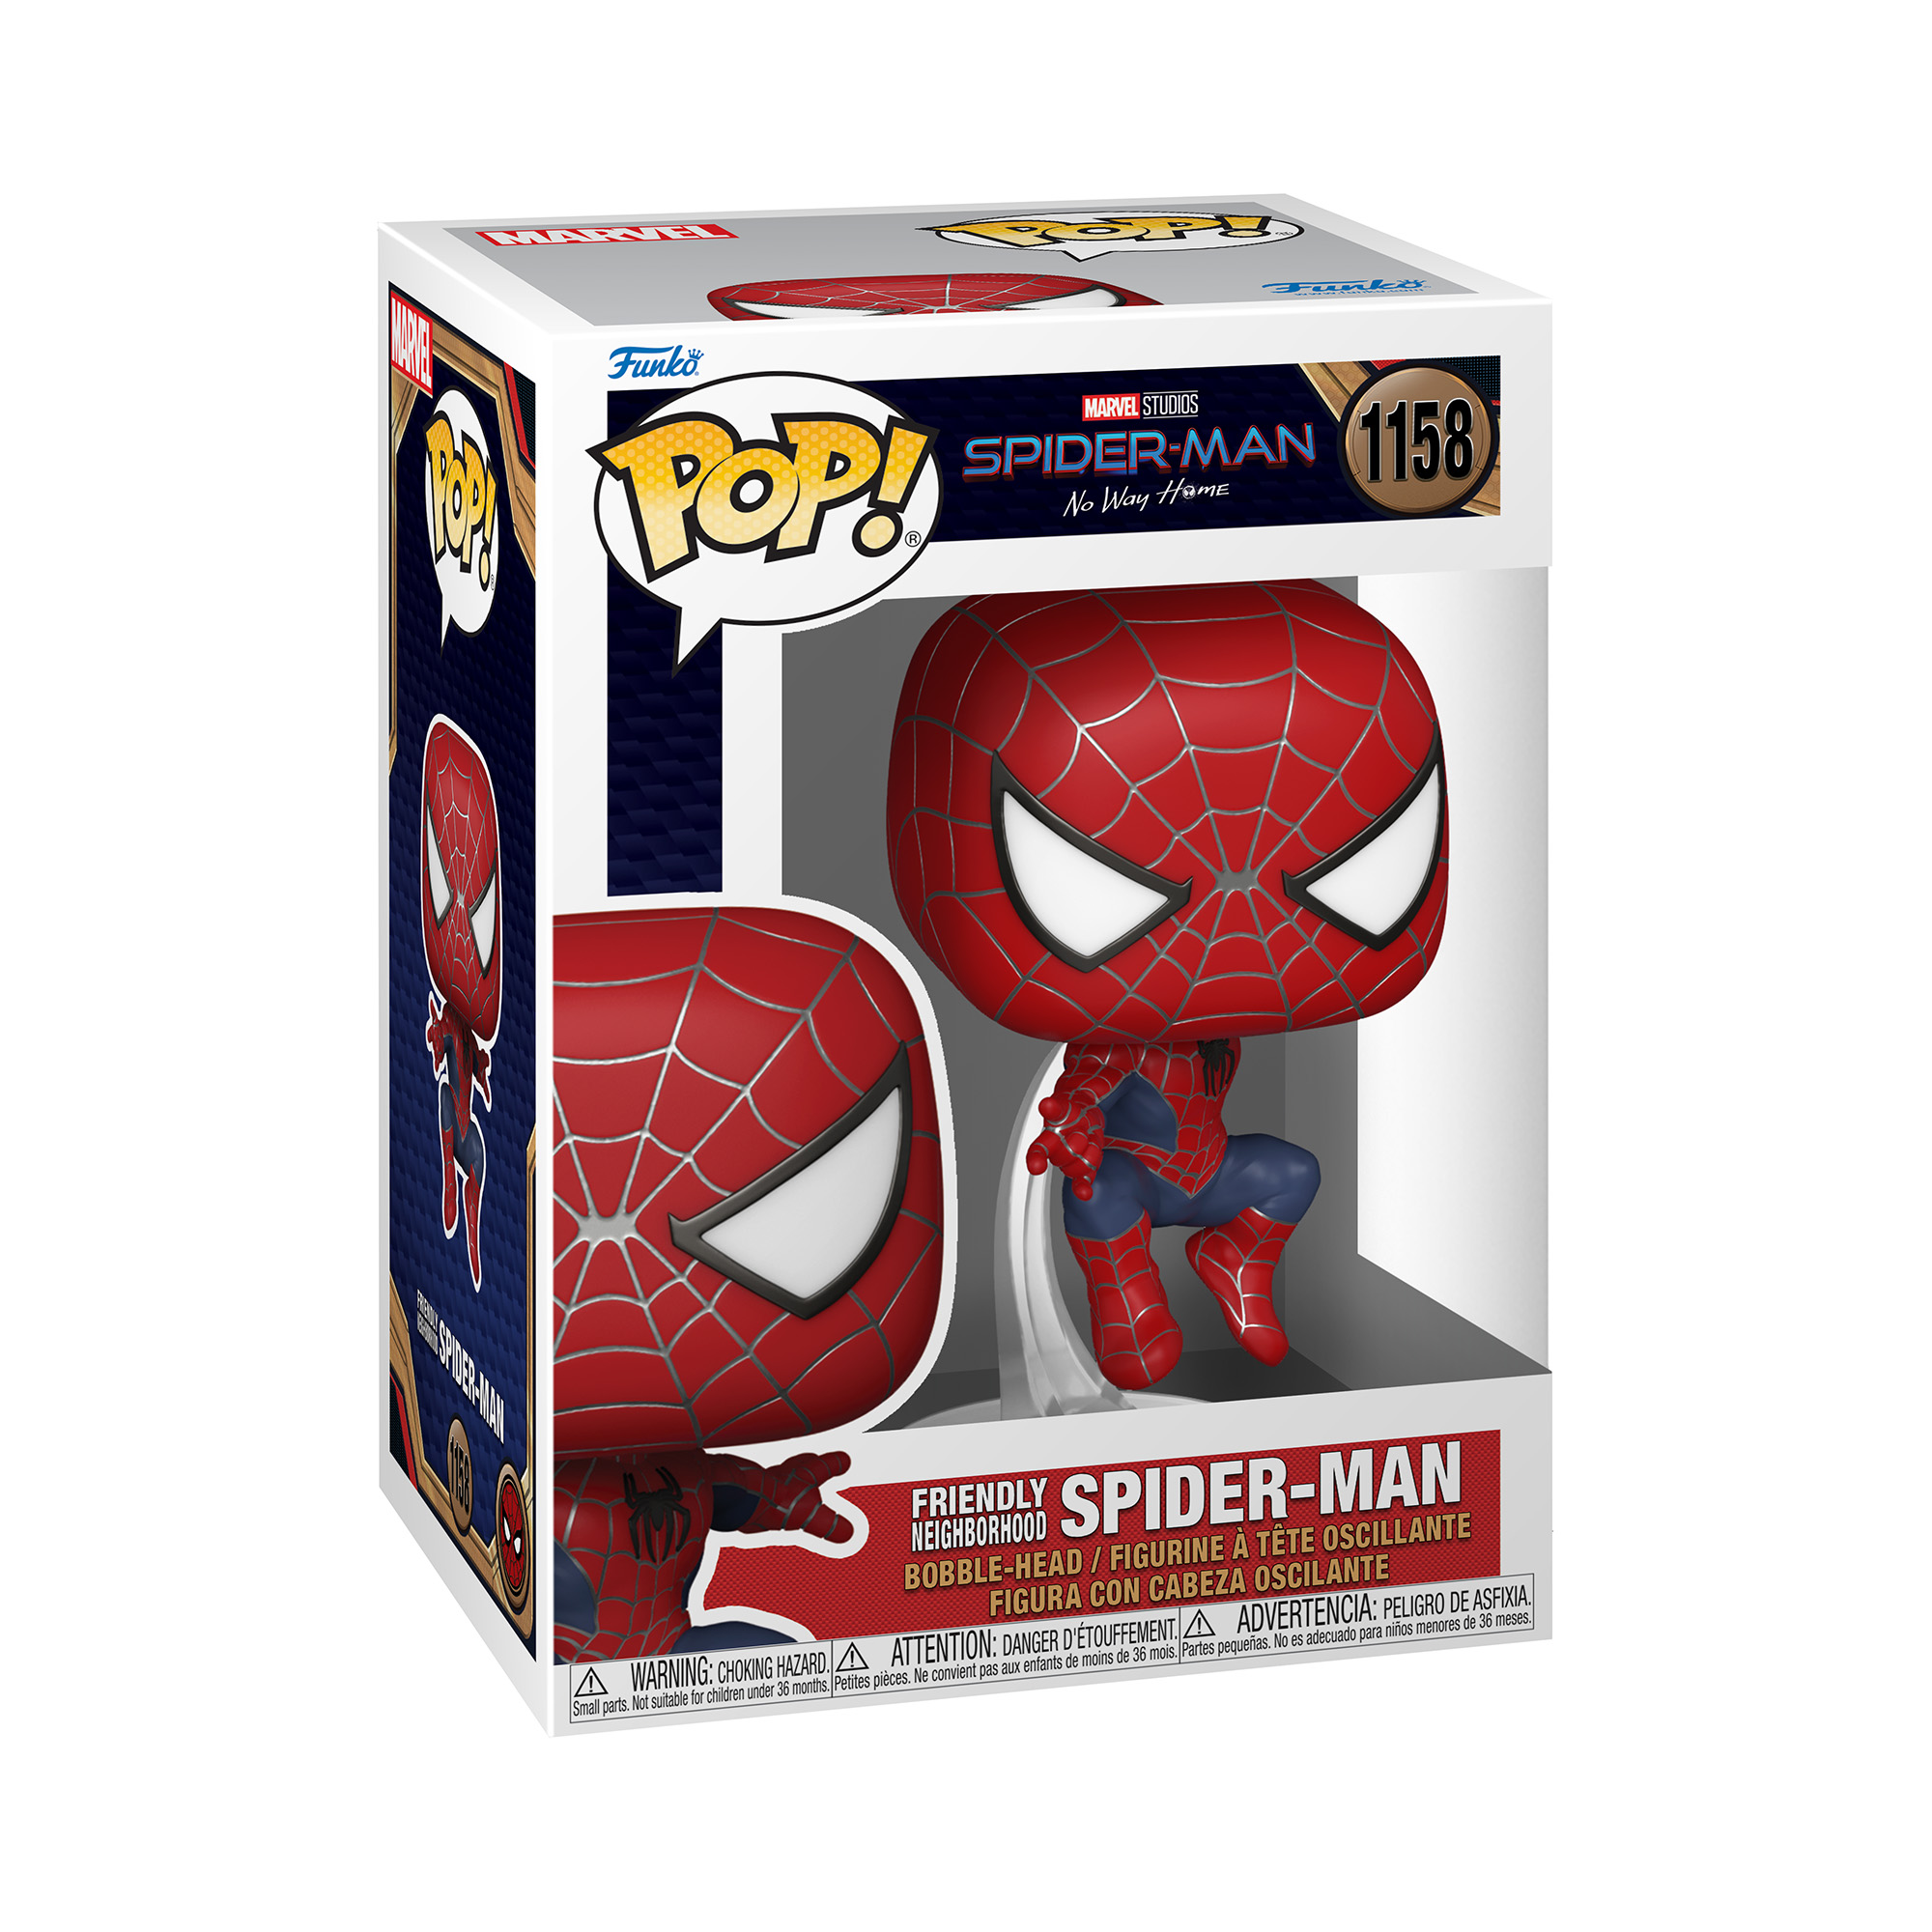 In-box look at Pop! Friendly Neighborhood Spider-Man from Spider-Man: No Way Home.